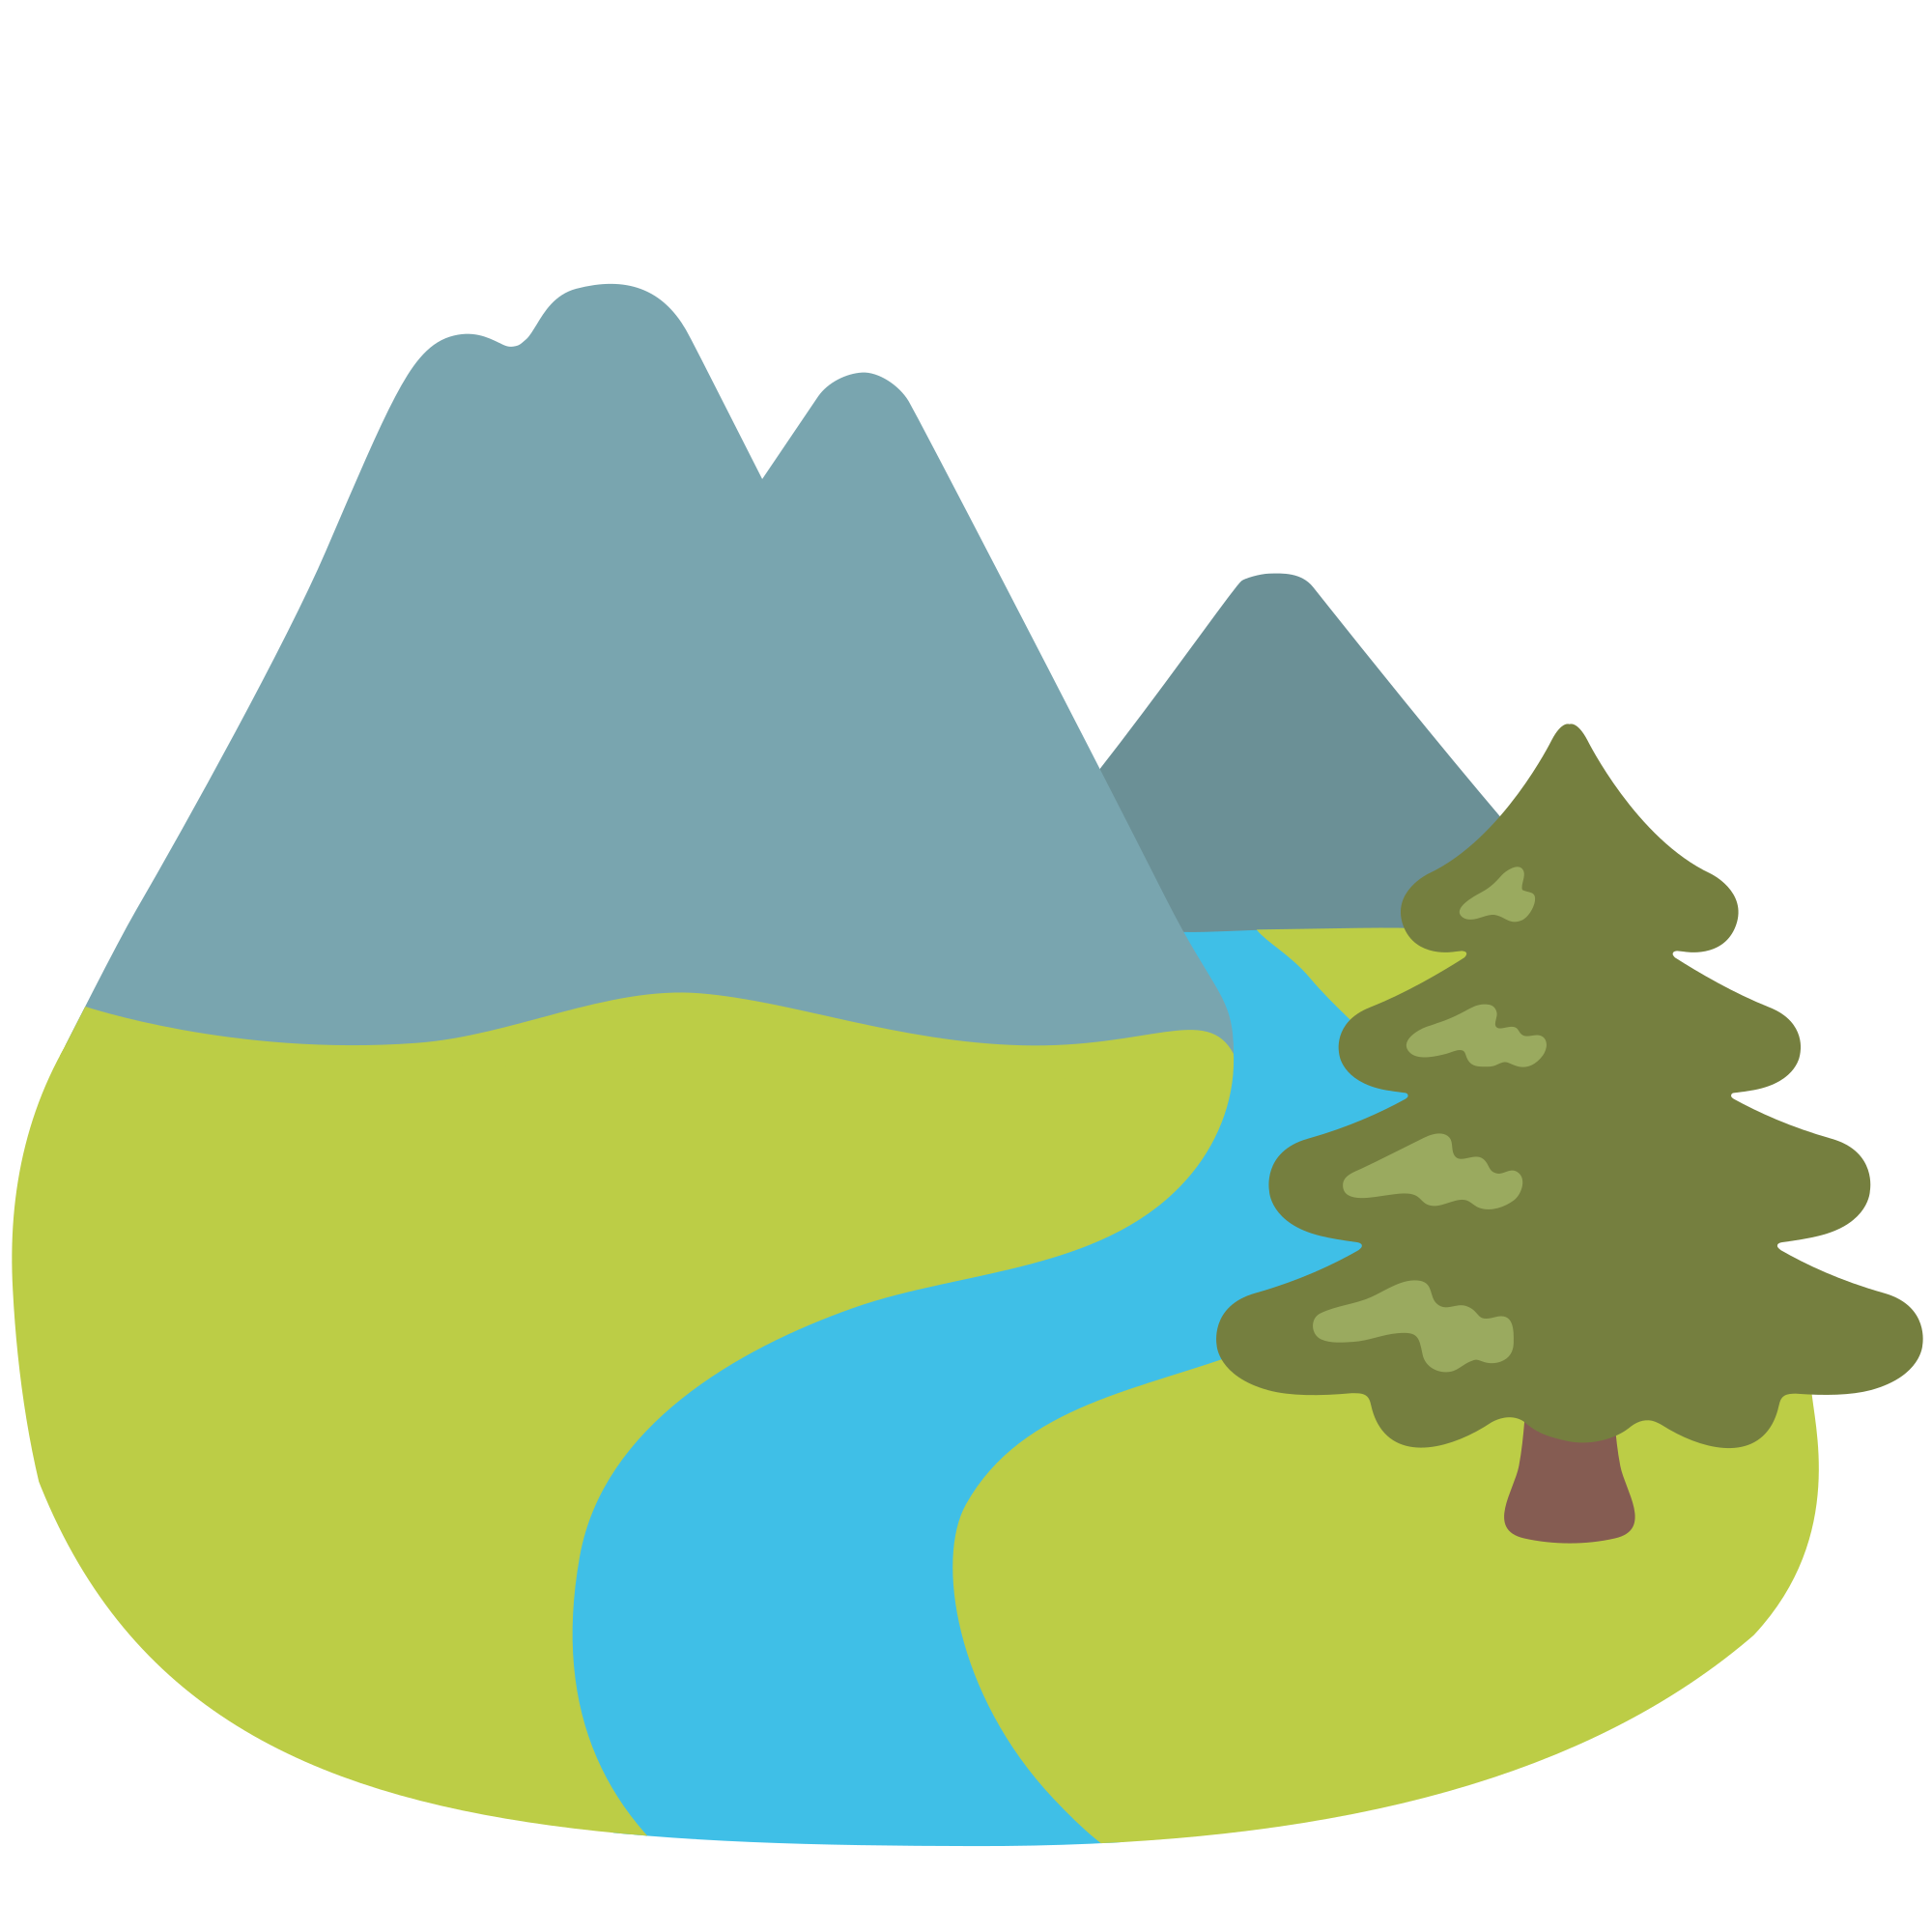 Lake clipart volcano crater, Lake volcano crater Transparent